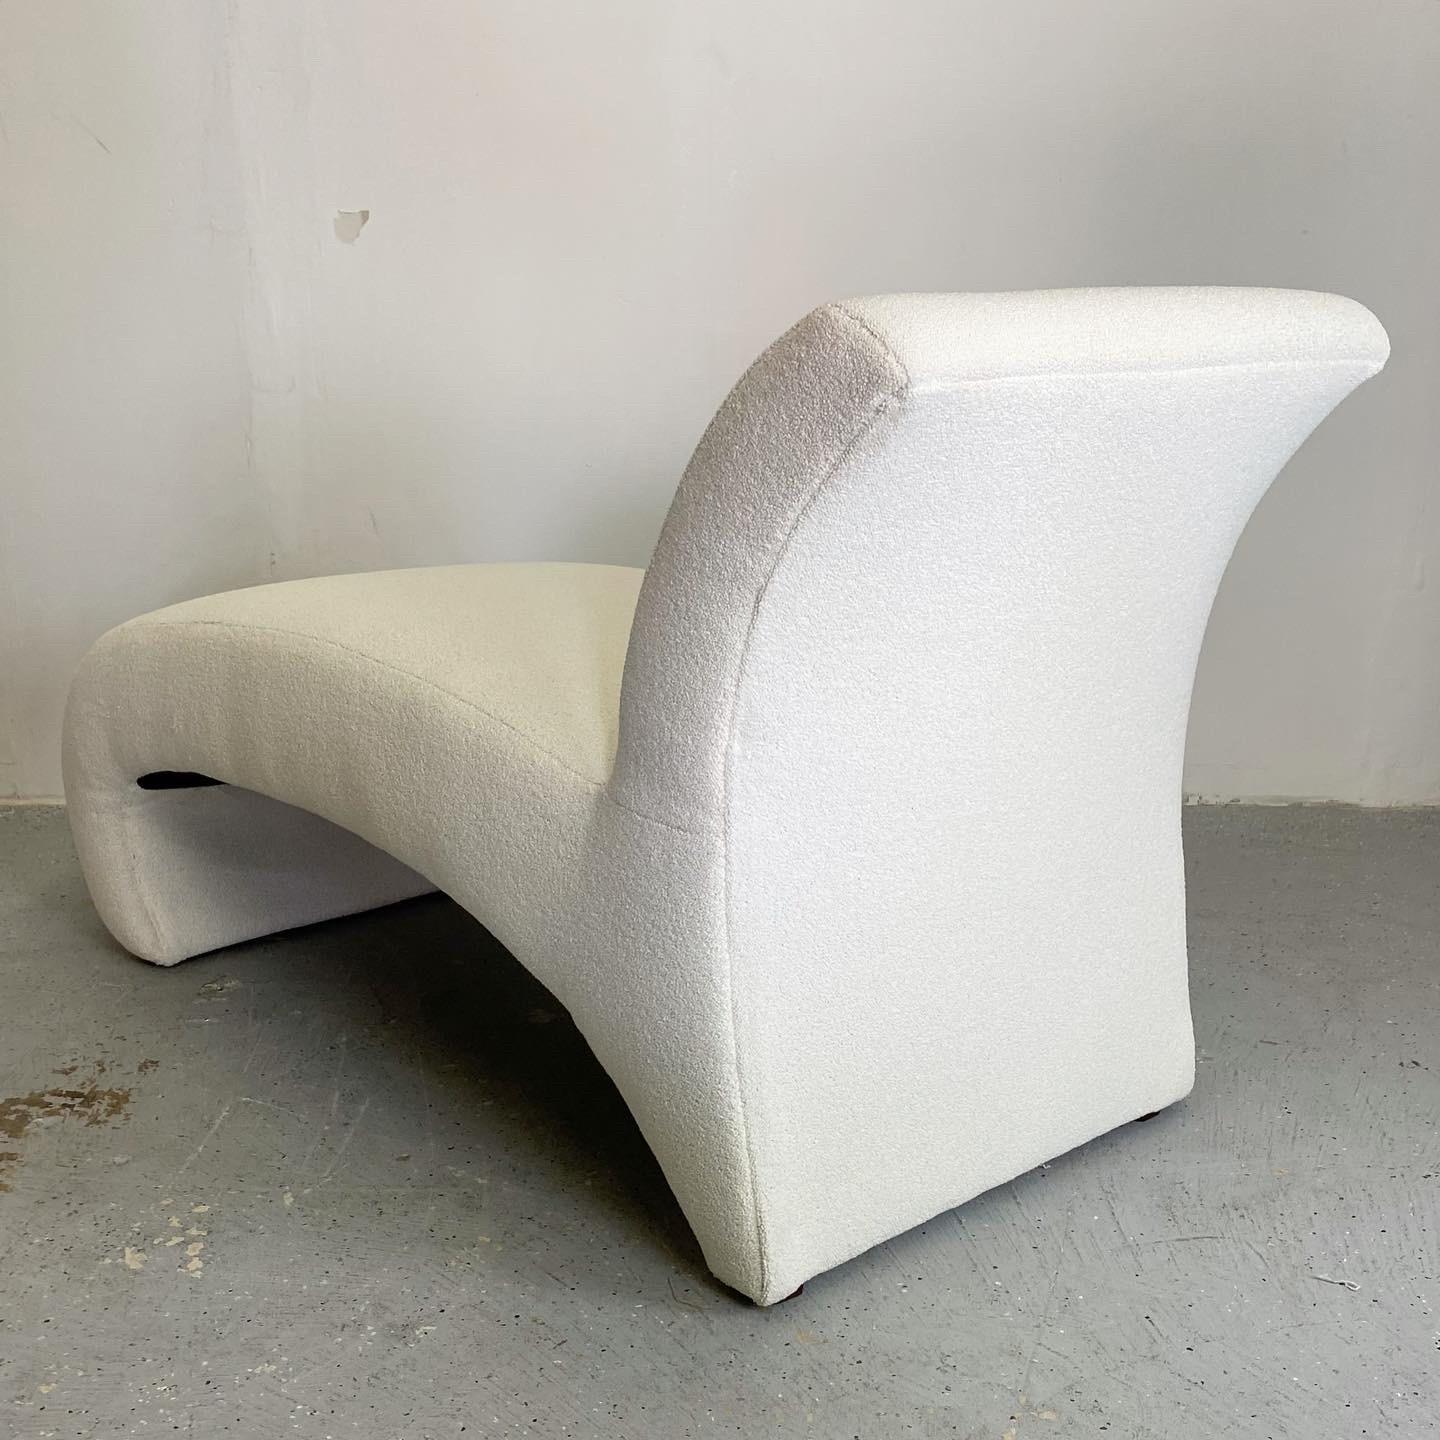 Vintage post modern chaise lounge newly upholstered in a plush textured fabric. Dating to the 1980s